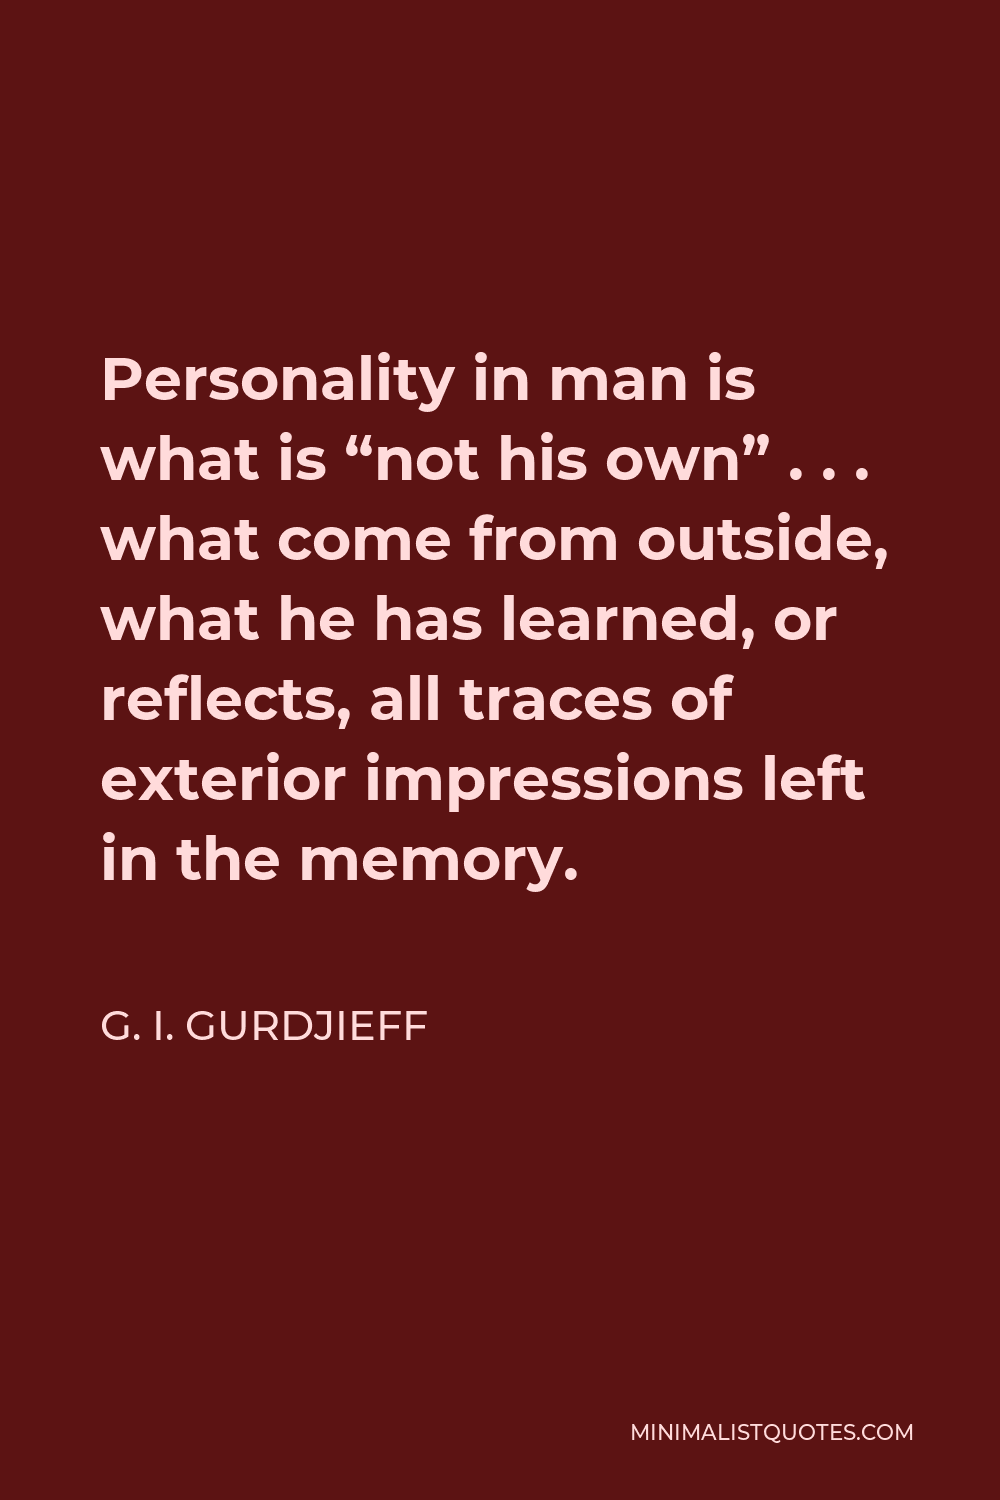 G. I. Gurdjieff Quote - Personality in man is what is “not his own” . . . what come from outside, what he has learned, or reflects, all traces of exterior impressions left in the memory.